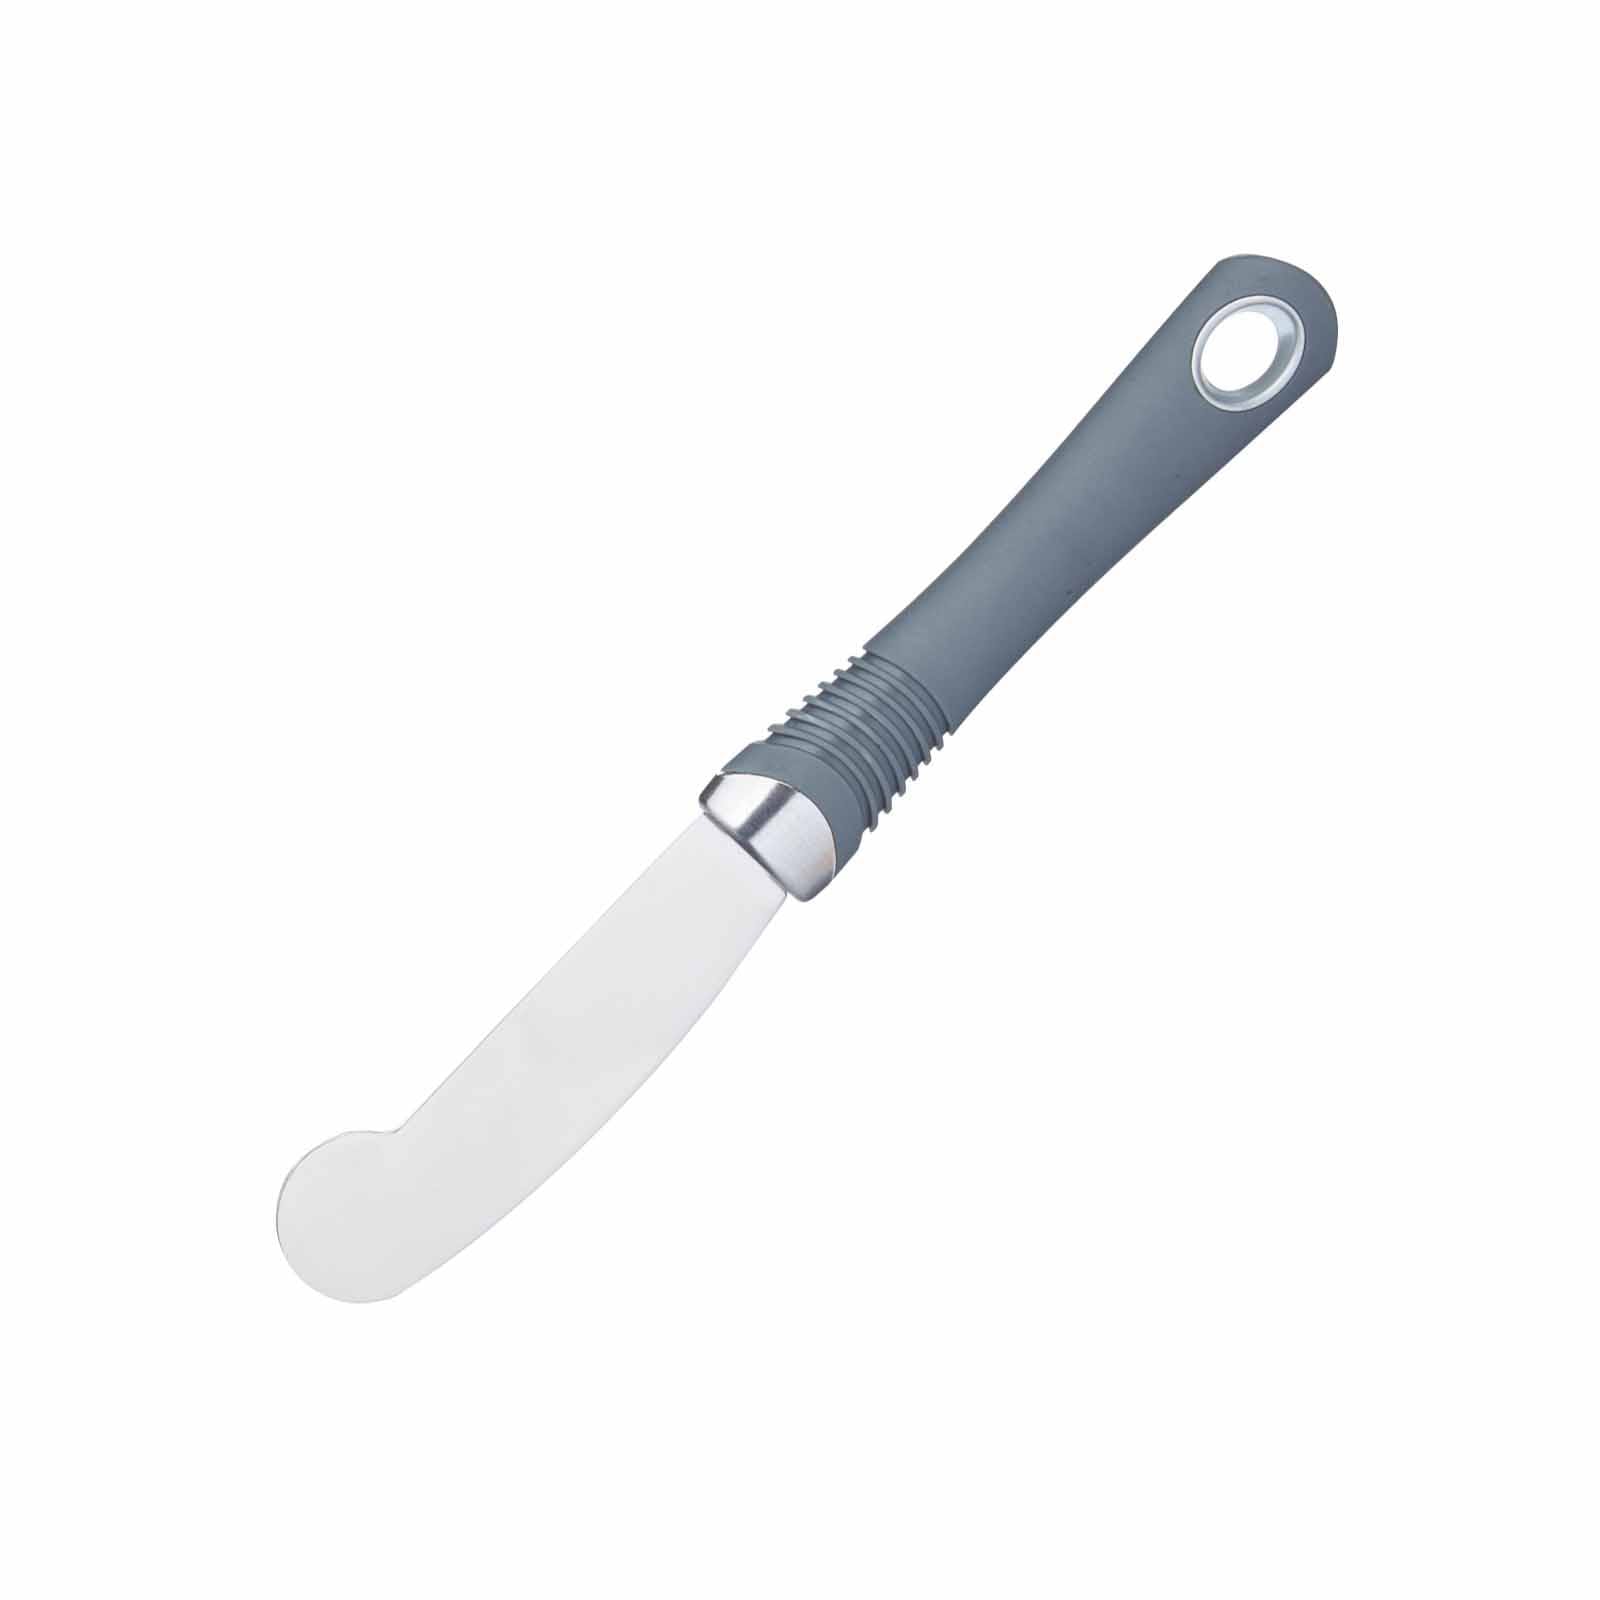 KitchenCraft Professional Butter Spreader Knife with Soft-Grip Handle - The Cooks Cupboard Ltd